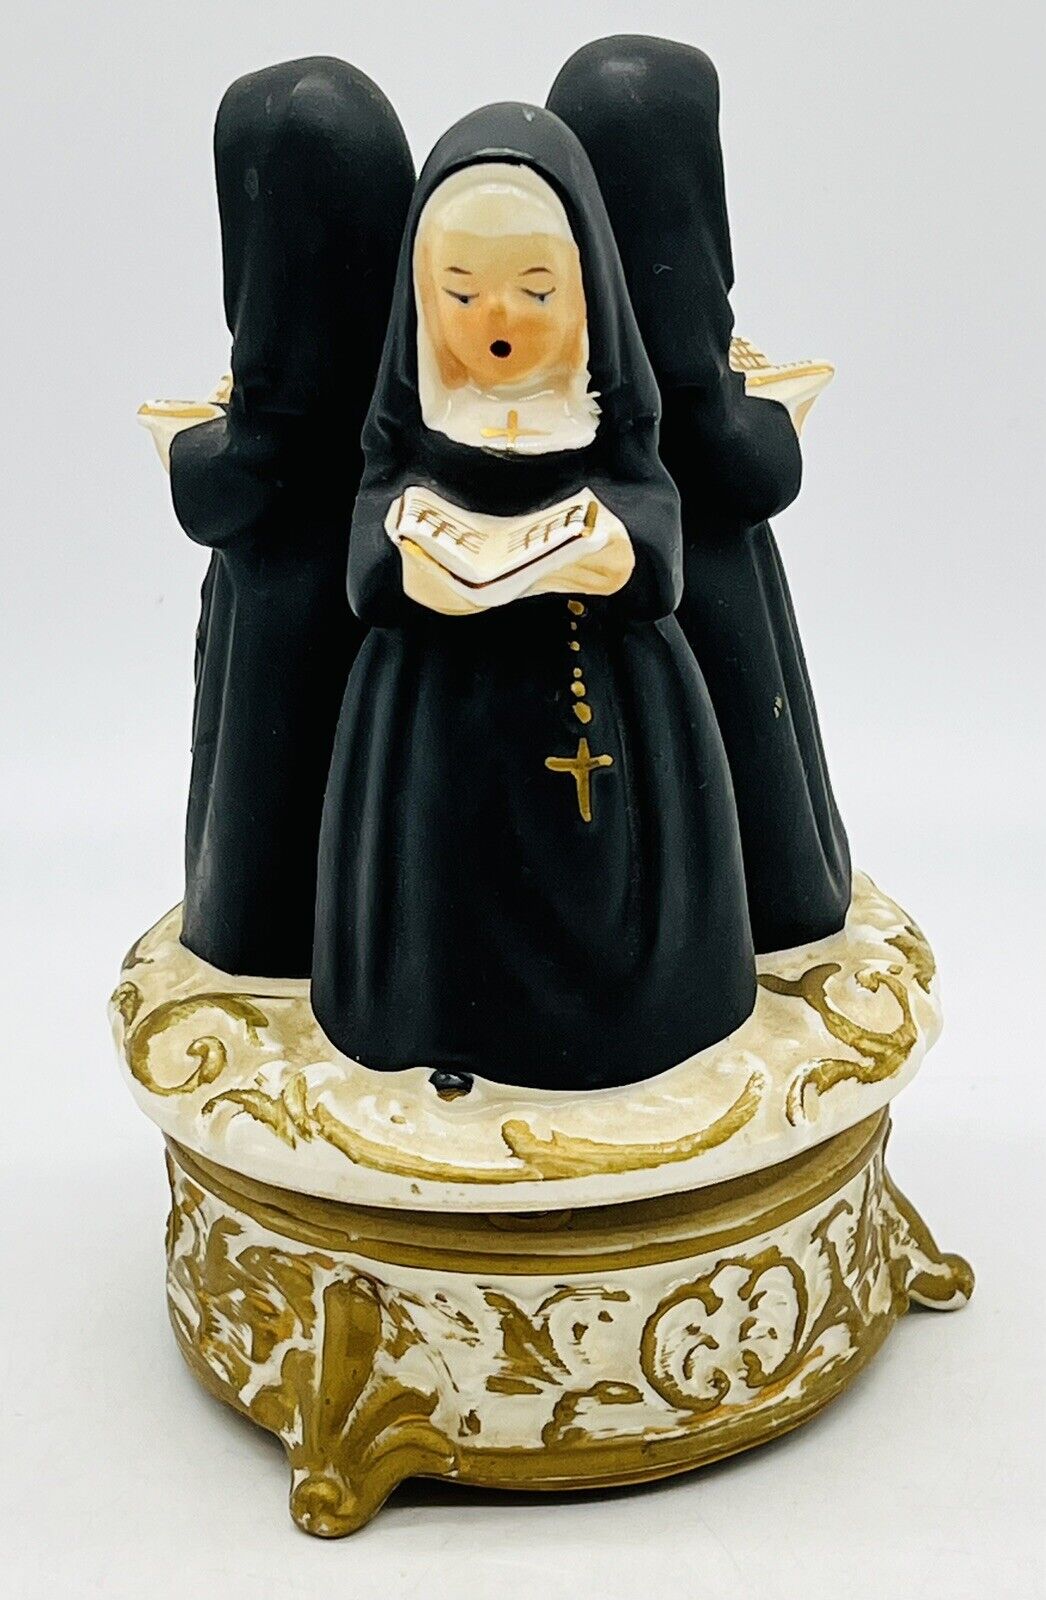 Vintage Nuns Music Box Tilso Japan Handpainted Singing Dominique 7 inch VIDEO